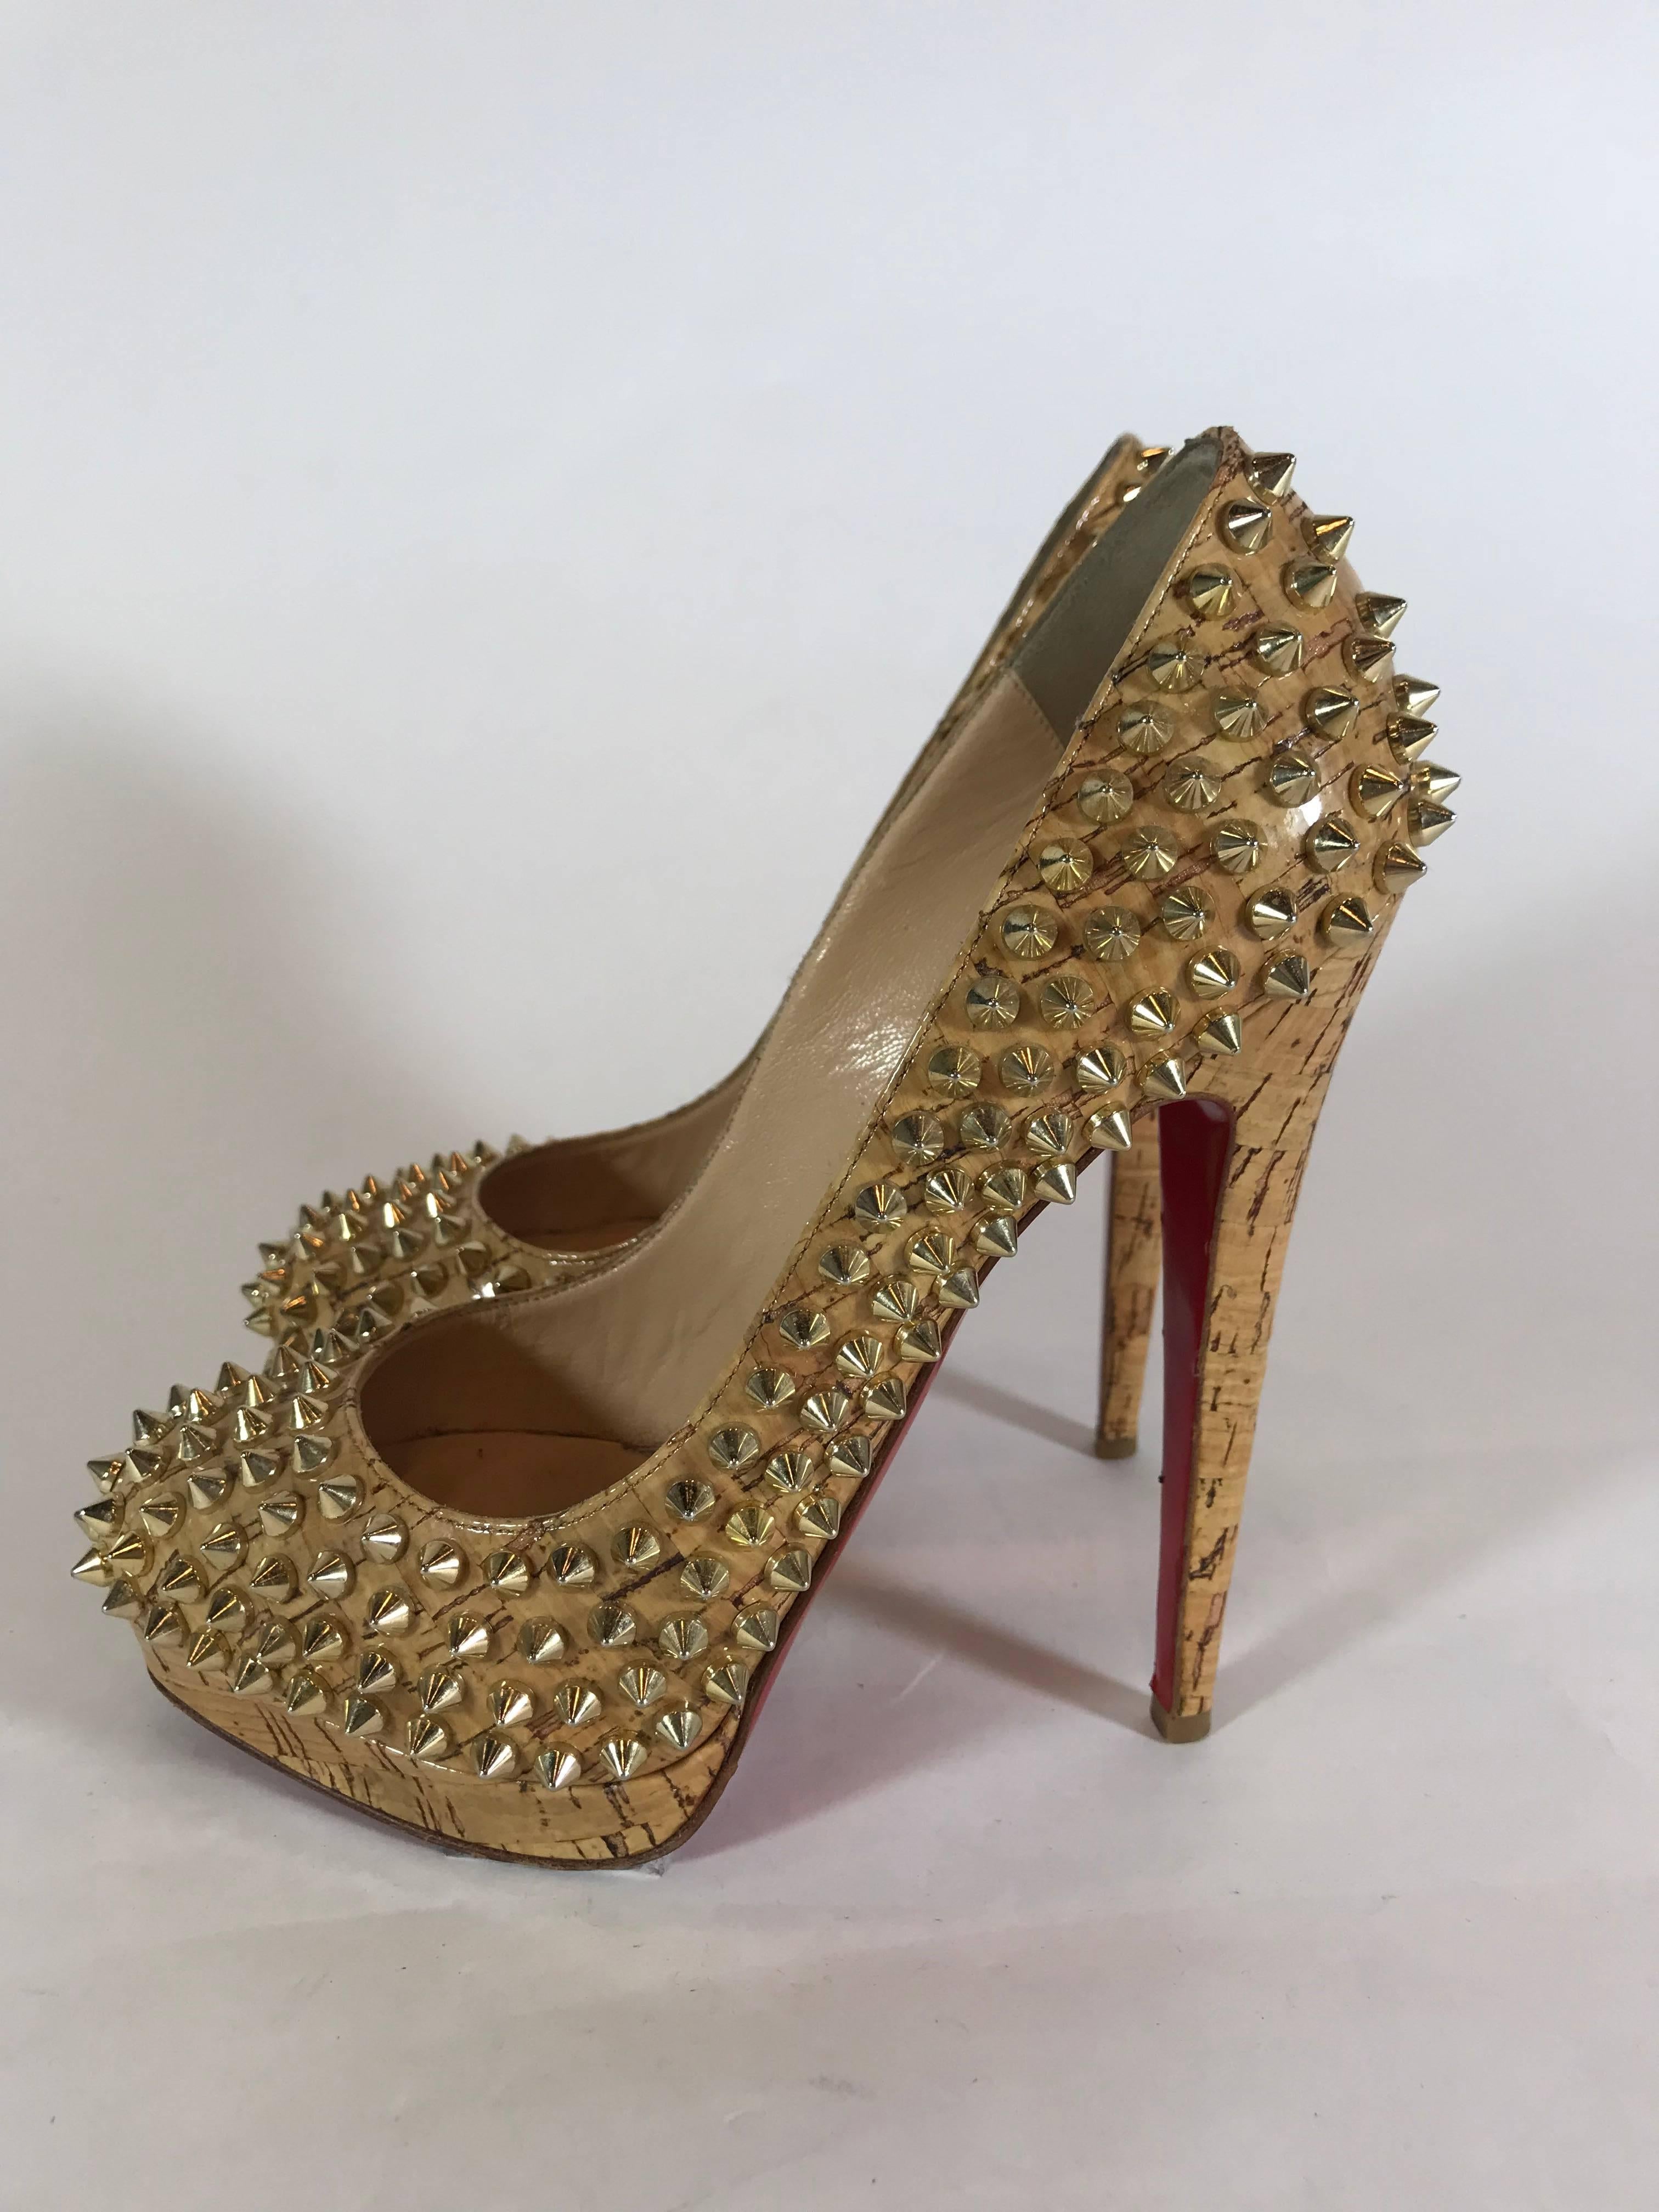 Christian Louboutin Glazed Cork 'Alti' Spike Pump In Excellent Condition For Sale In Roslyn, NY